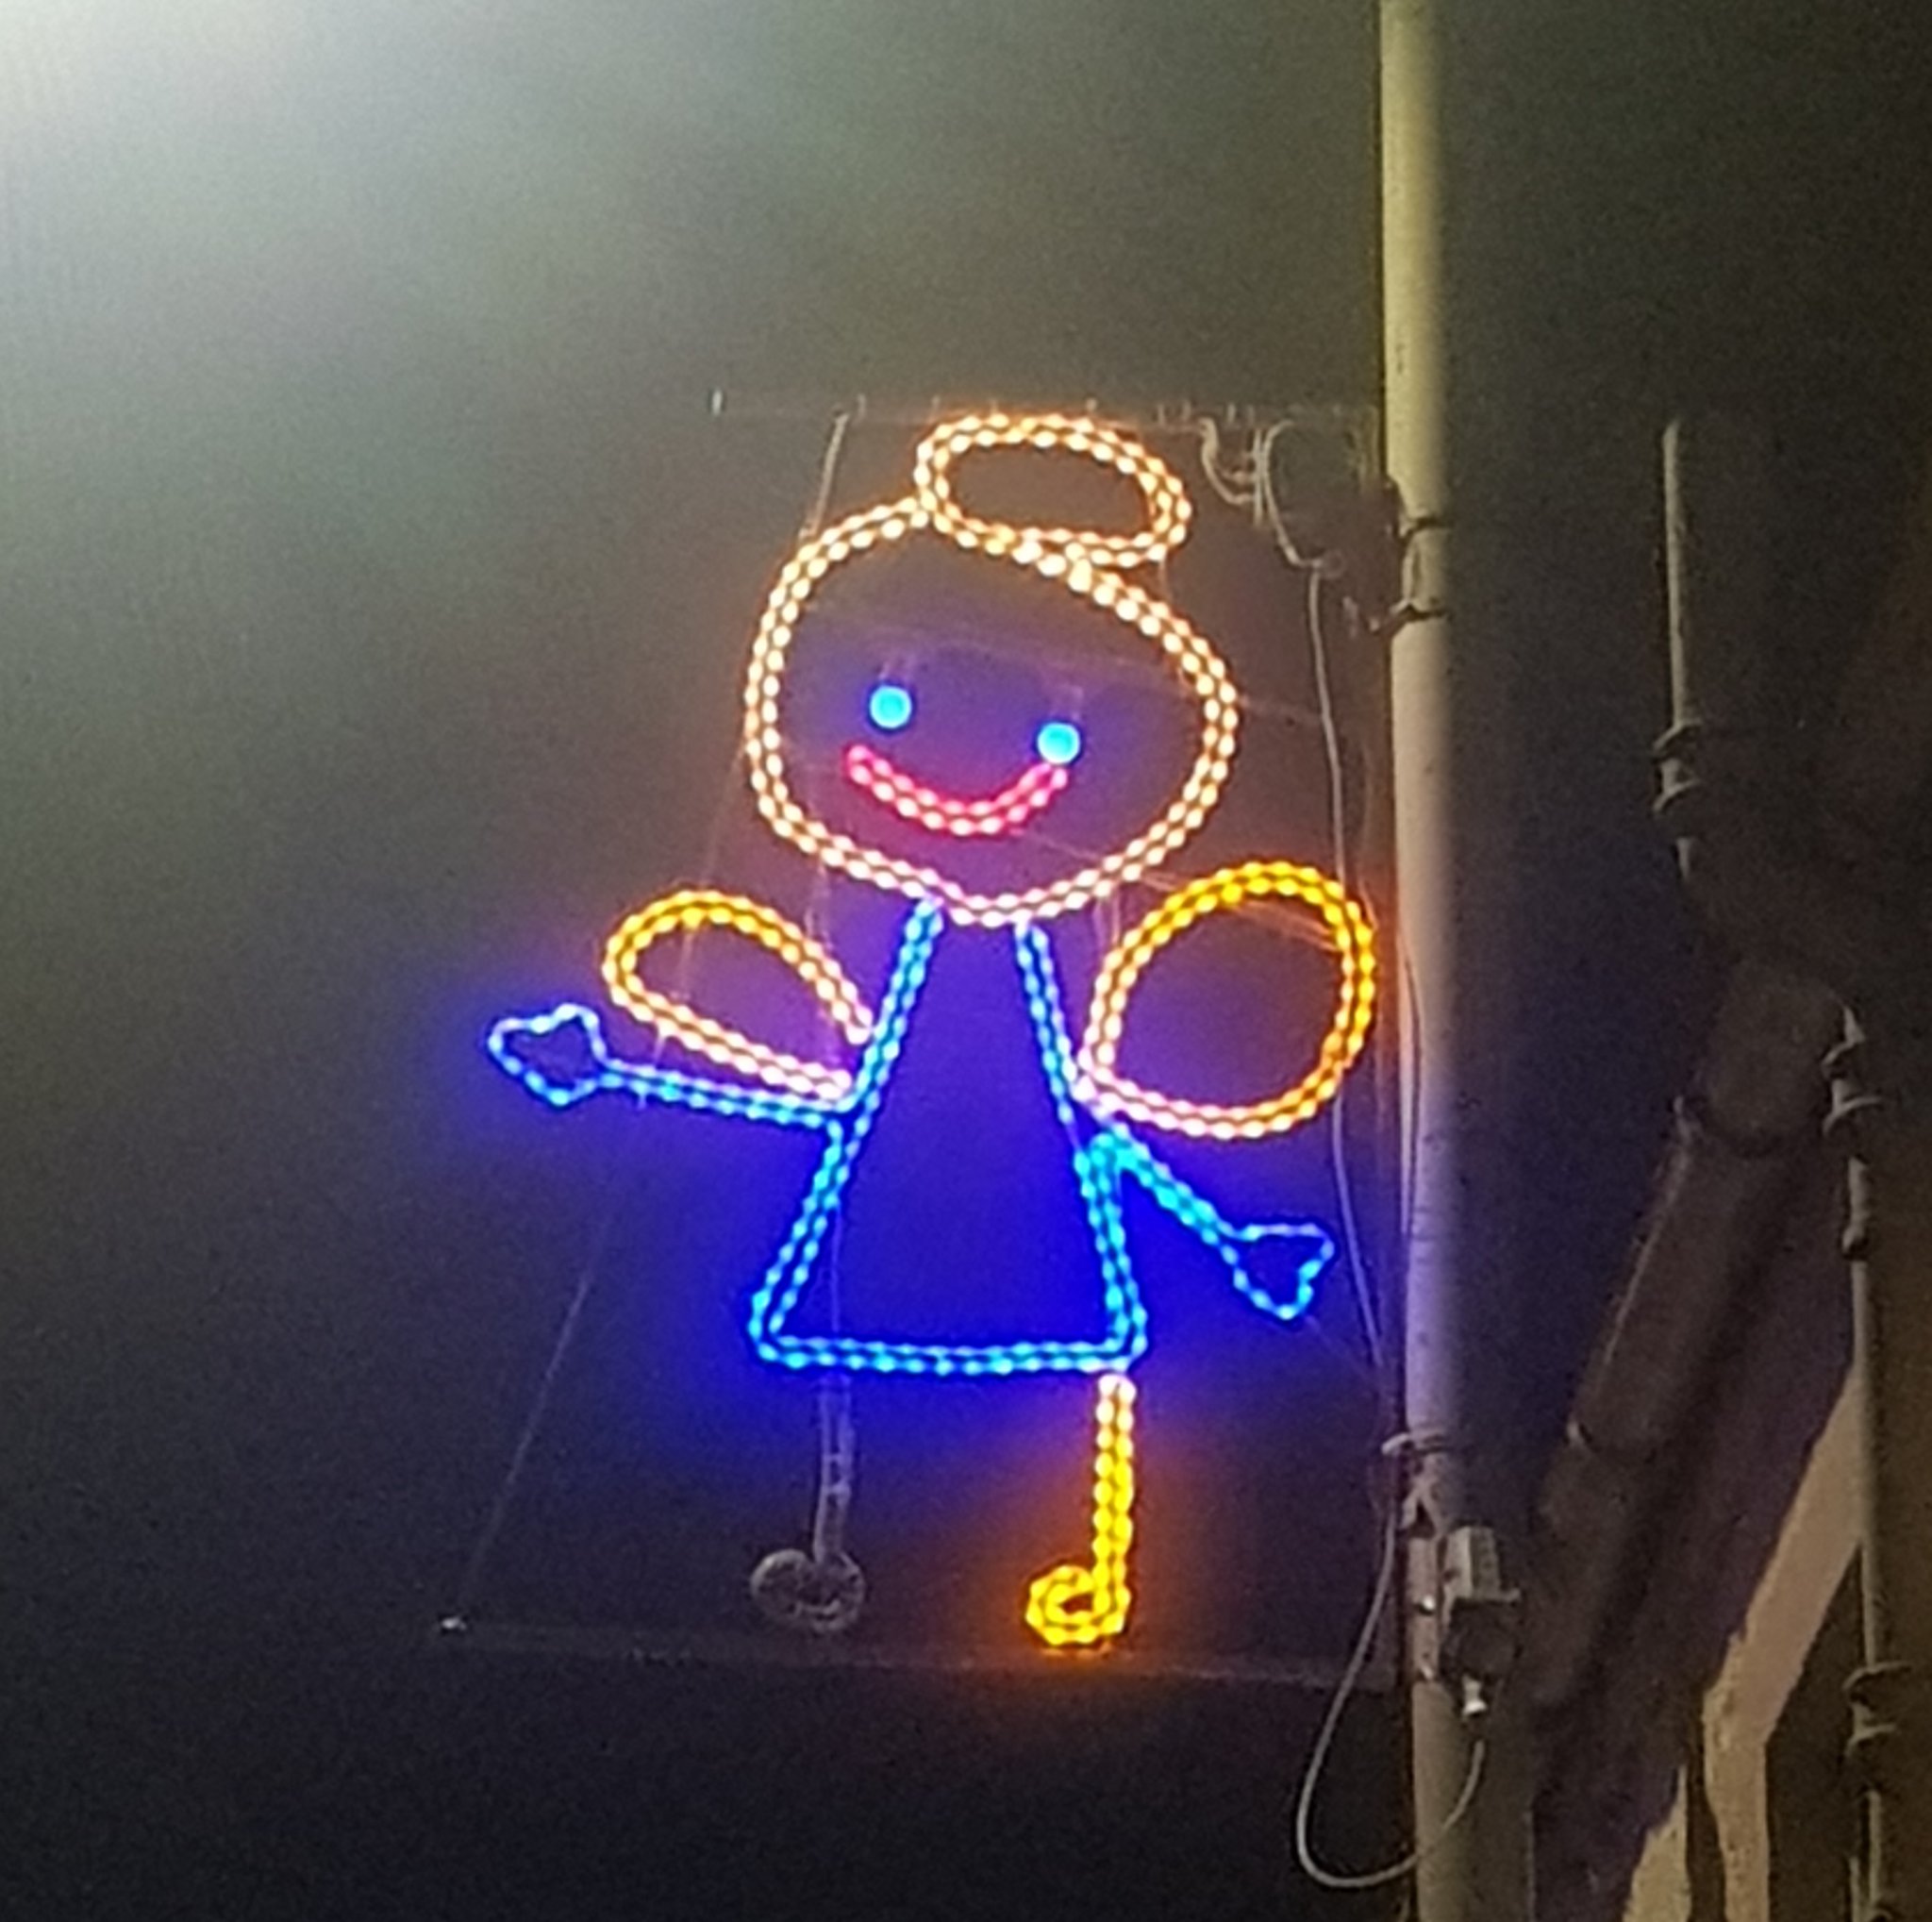 A photo of a city's Christmas lights on a light pole, in the shape of a child's drawing of an angel